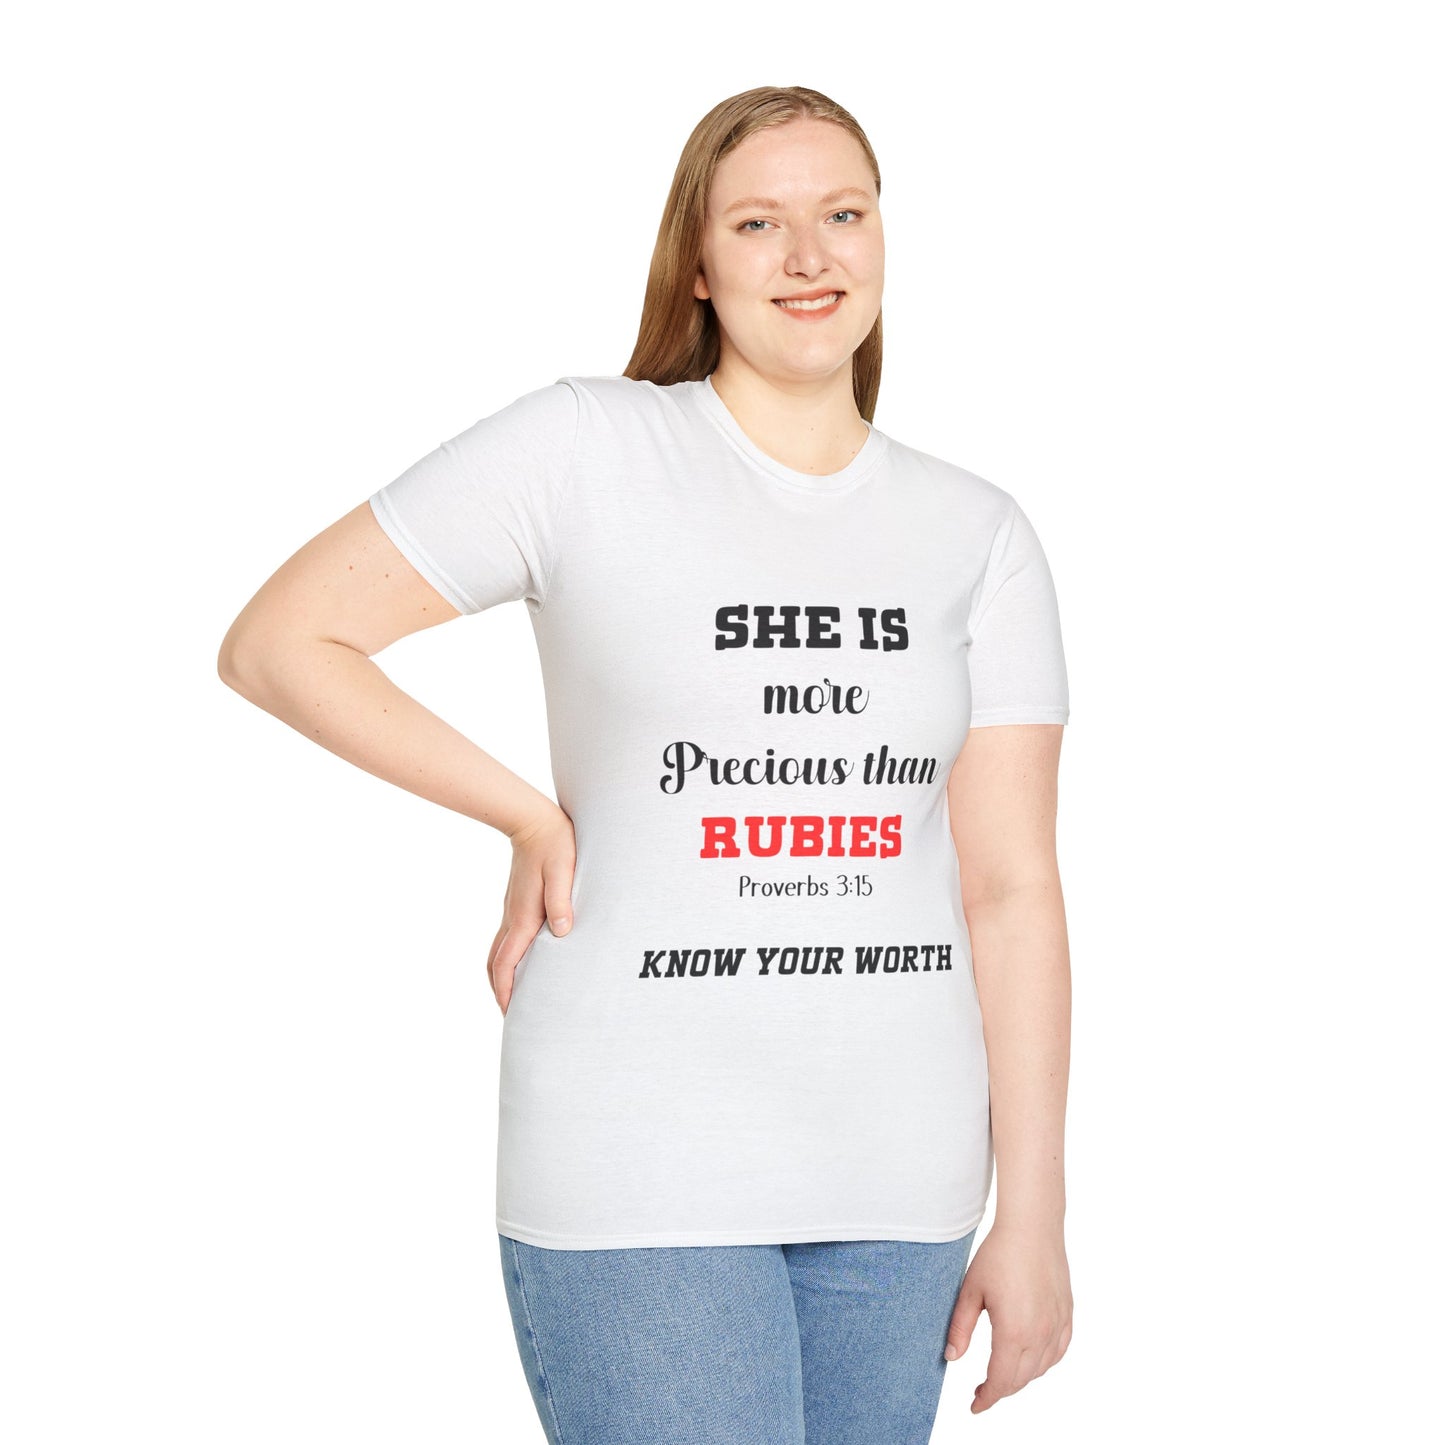 She is more precious than Rubies, Proverbs 3:15, Know Your Worth, Unisex Softstyle T-Shirt